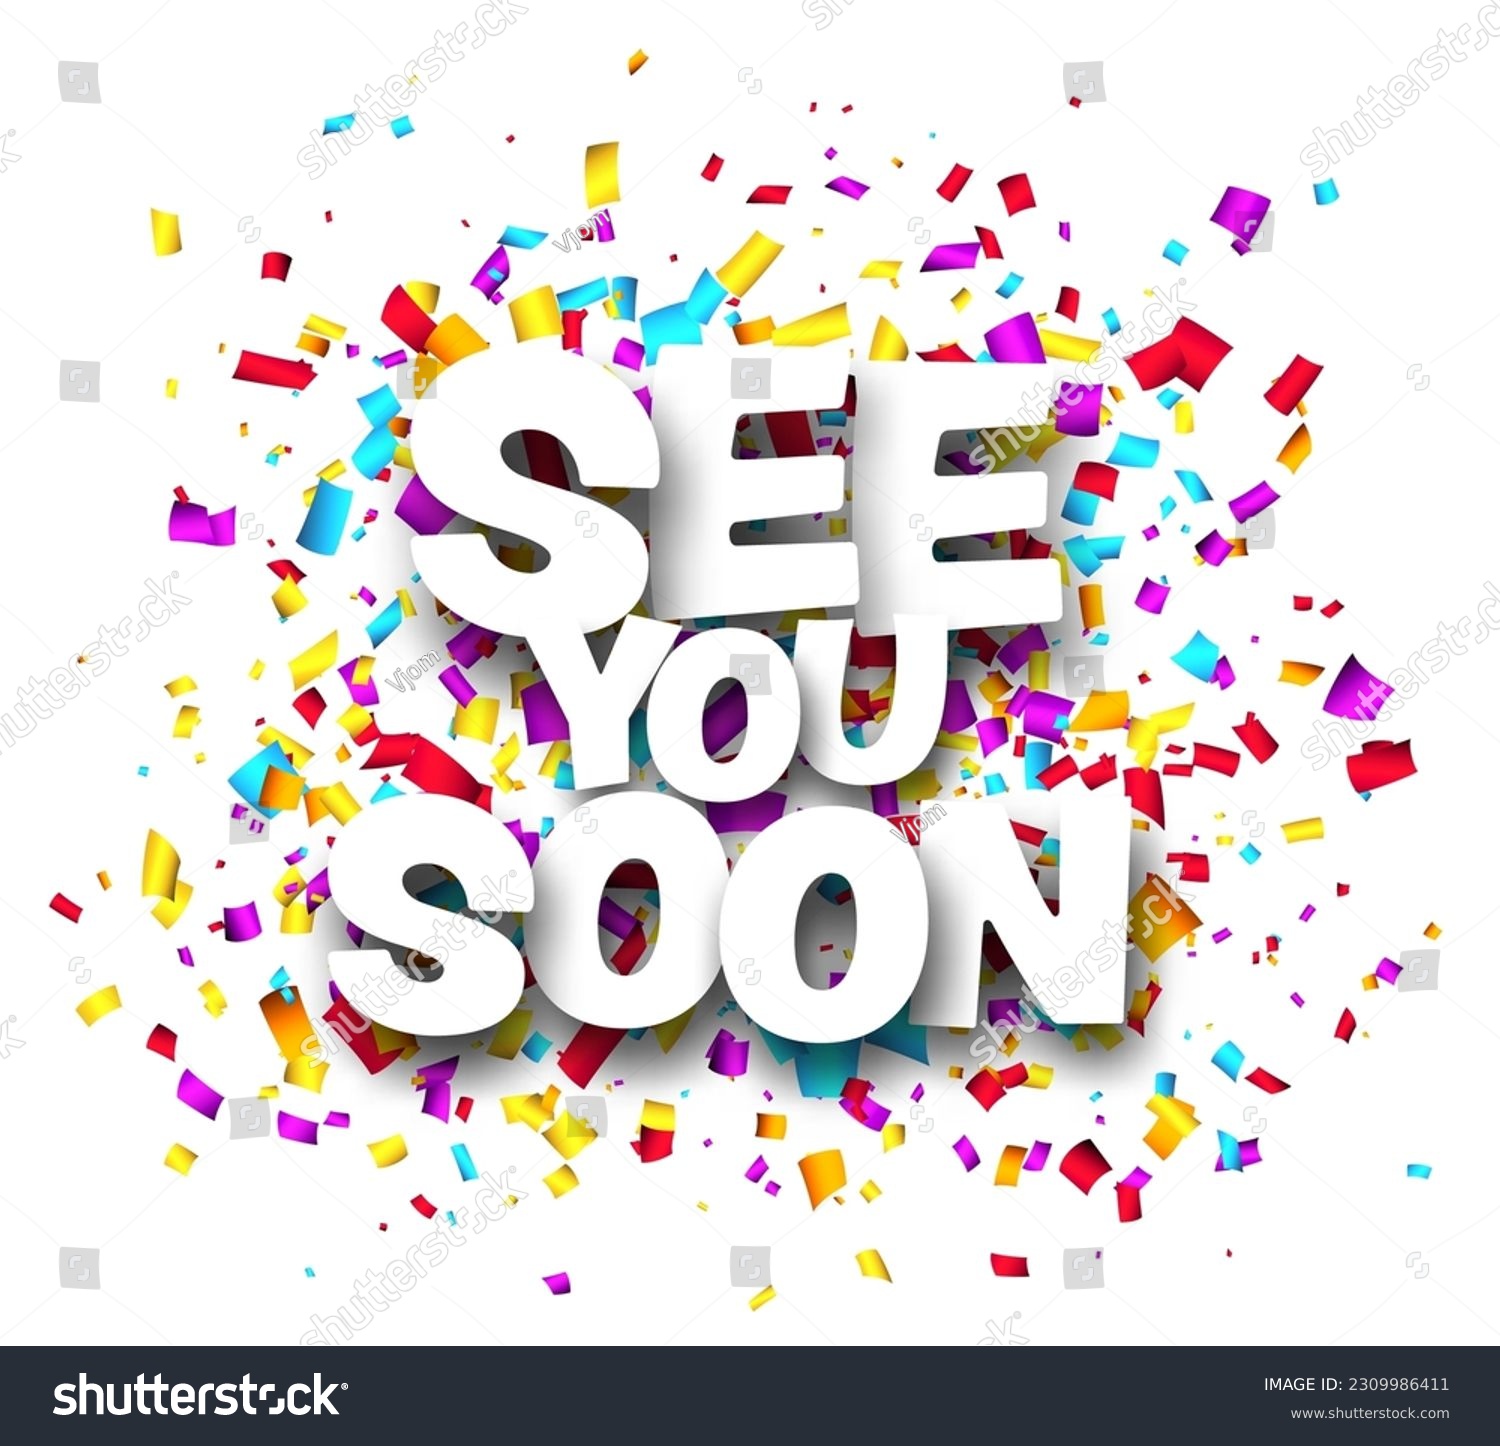 SVG of See you soon sign on colorful cut ribbon confetti background. Vector illustration. svg